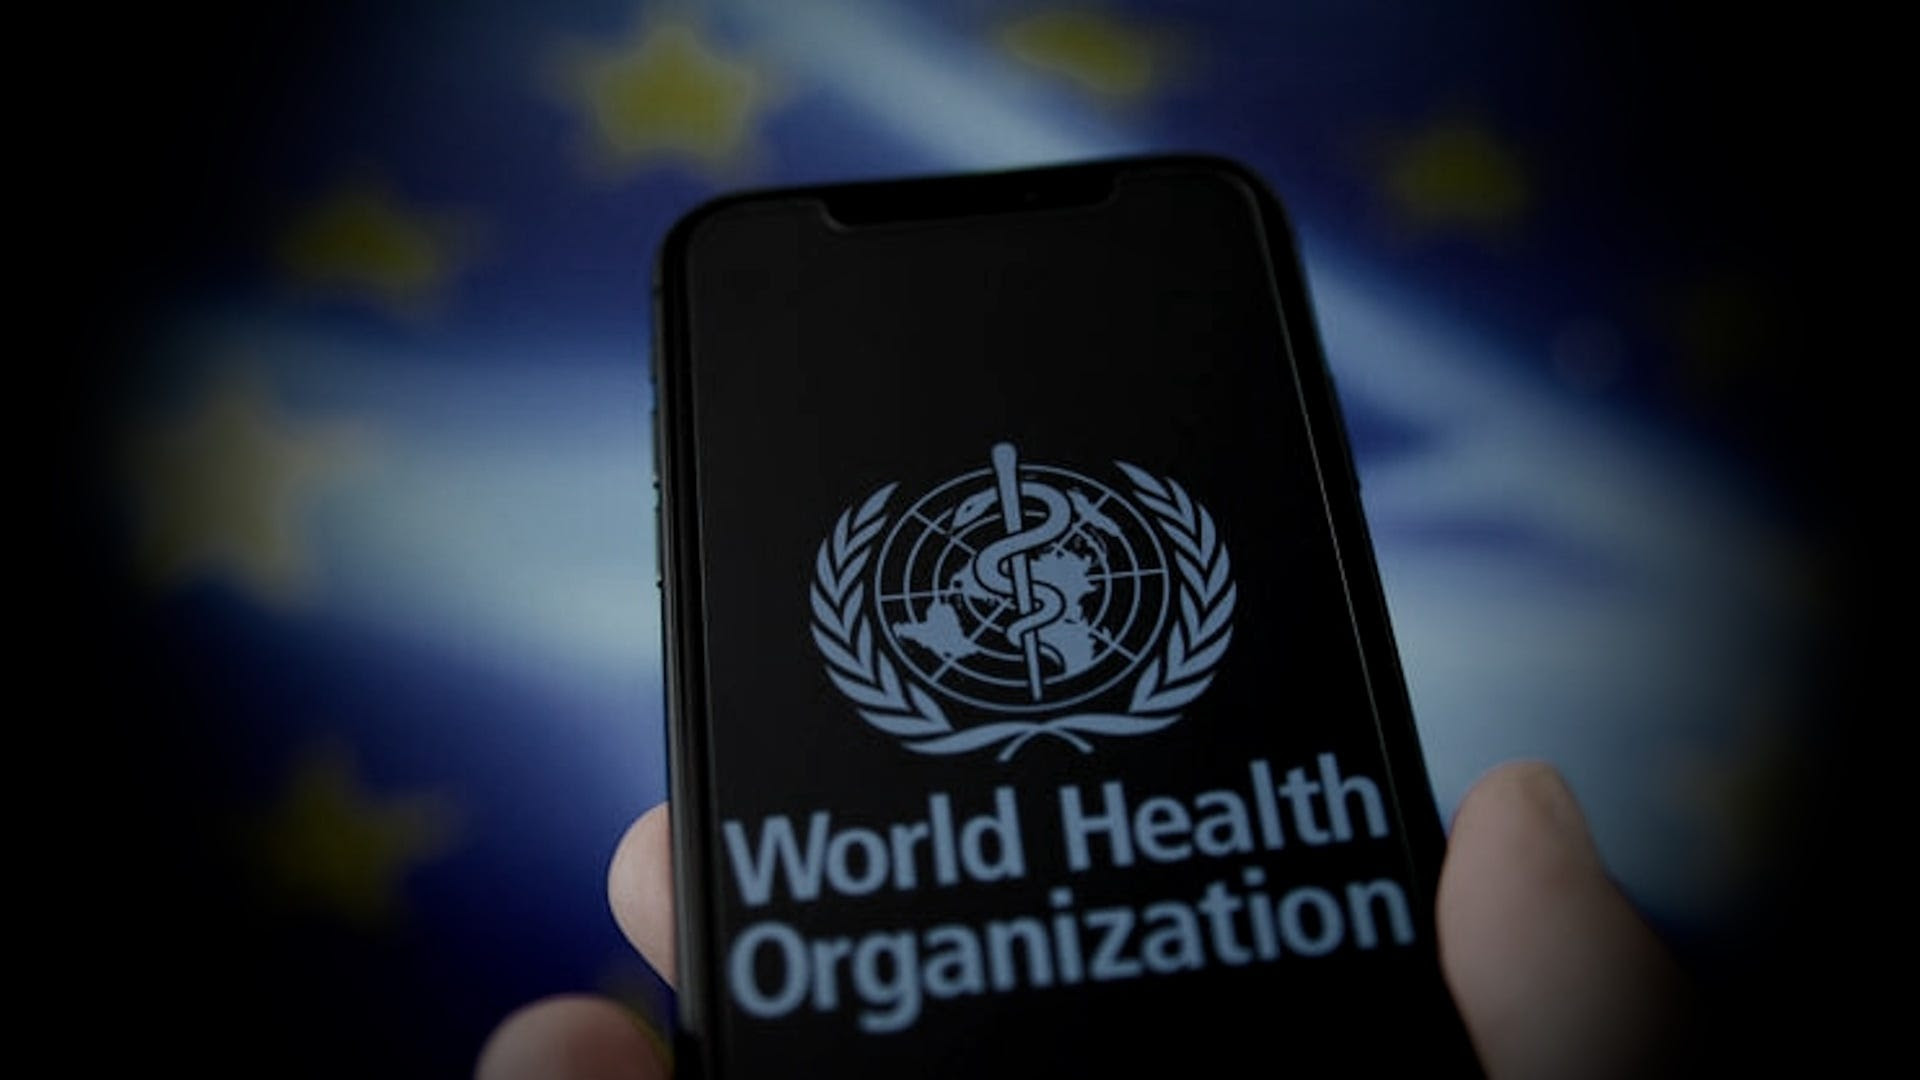 ‘Death Sentence for Millions’: WHO, EU Launch New Global Vaccine Passport Initiative Https%3A%2F%2Fsubstack-post-media.s3.amazonaws.com%2Fpublic%2Fimages%2F88f16a3d-8818-42b5-bf9c-89225abf8366_1920x1080